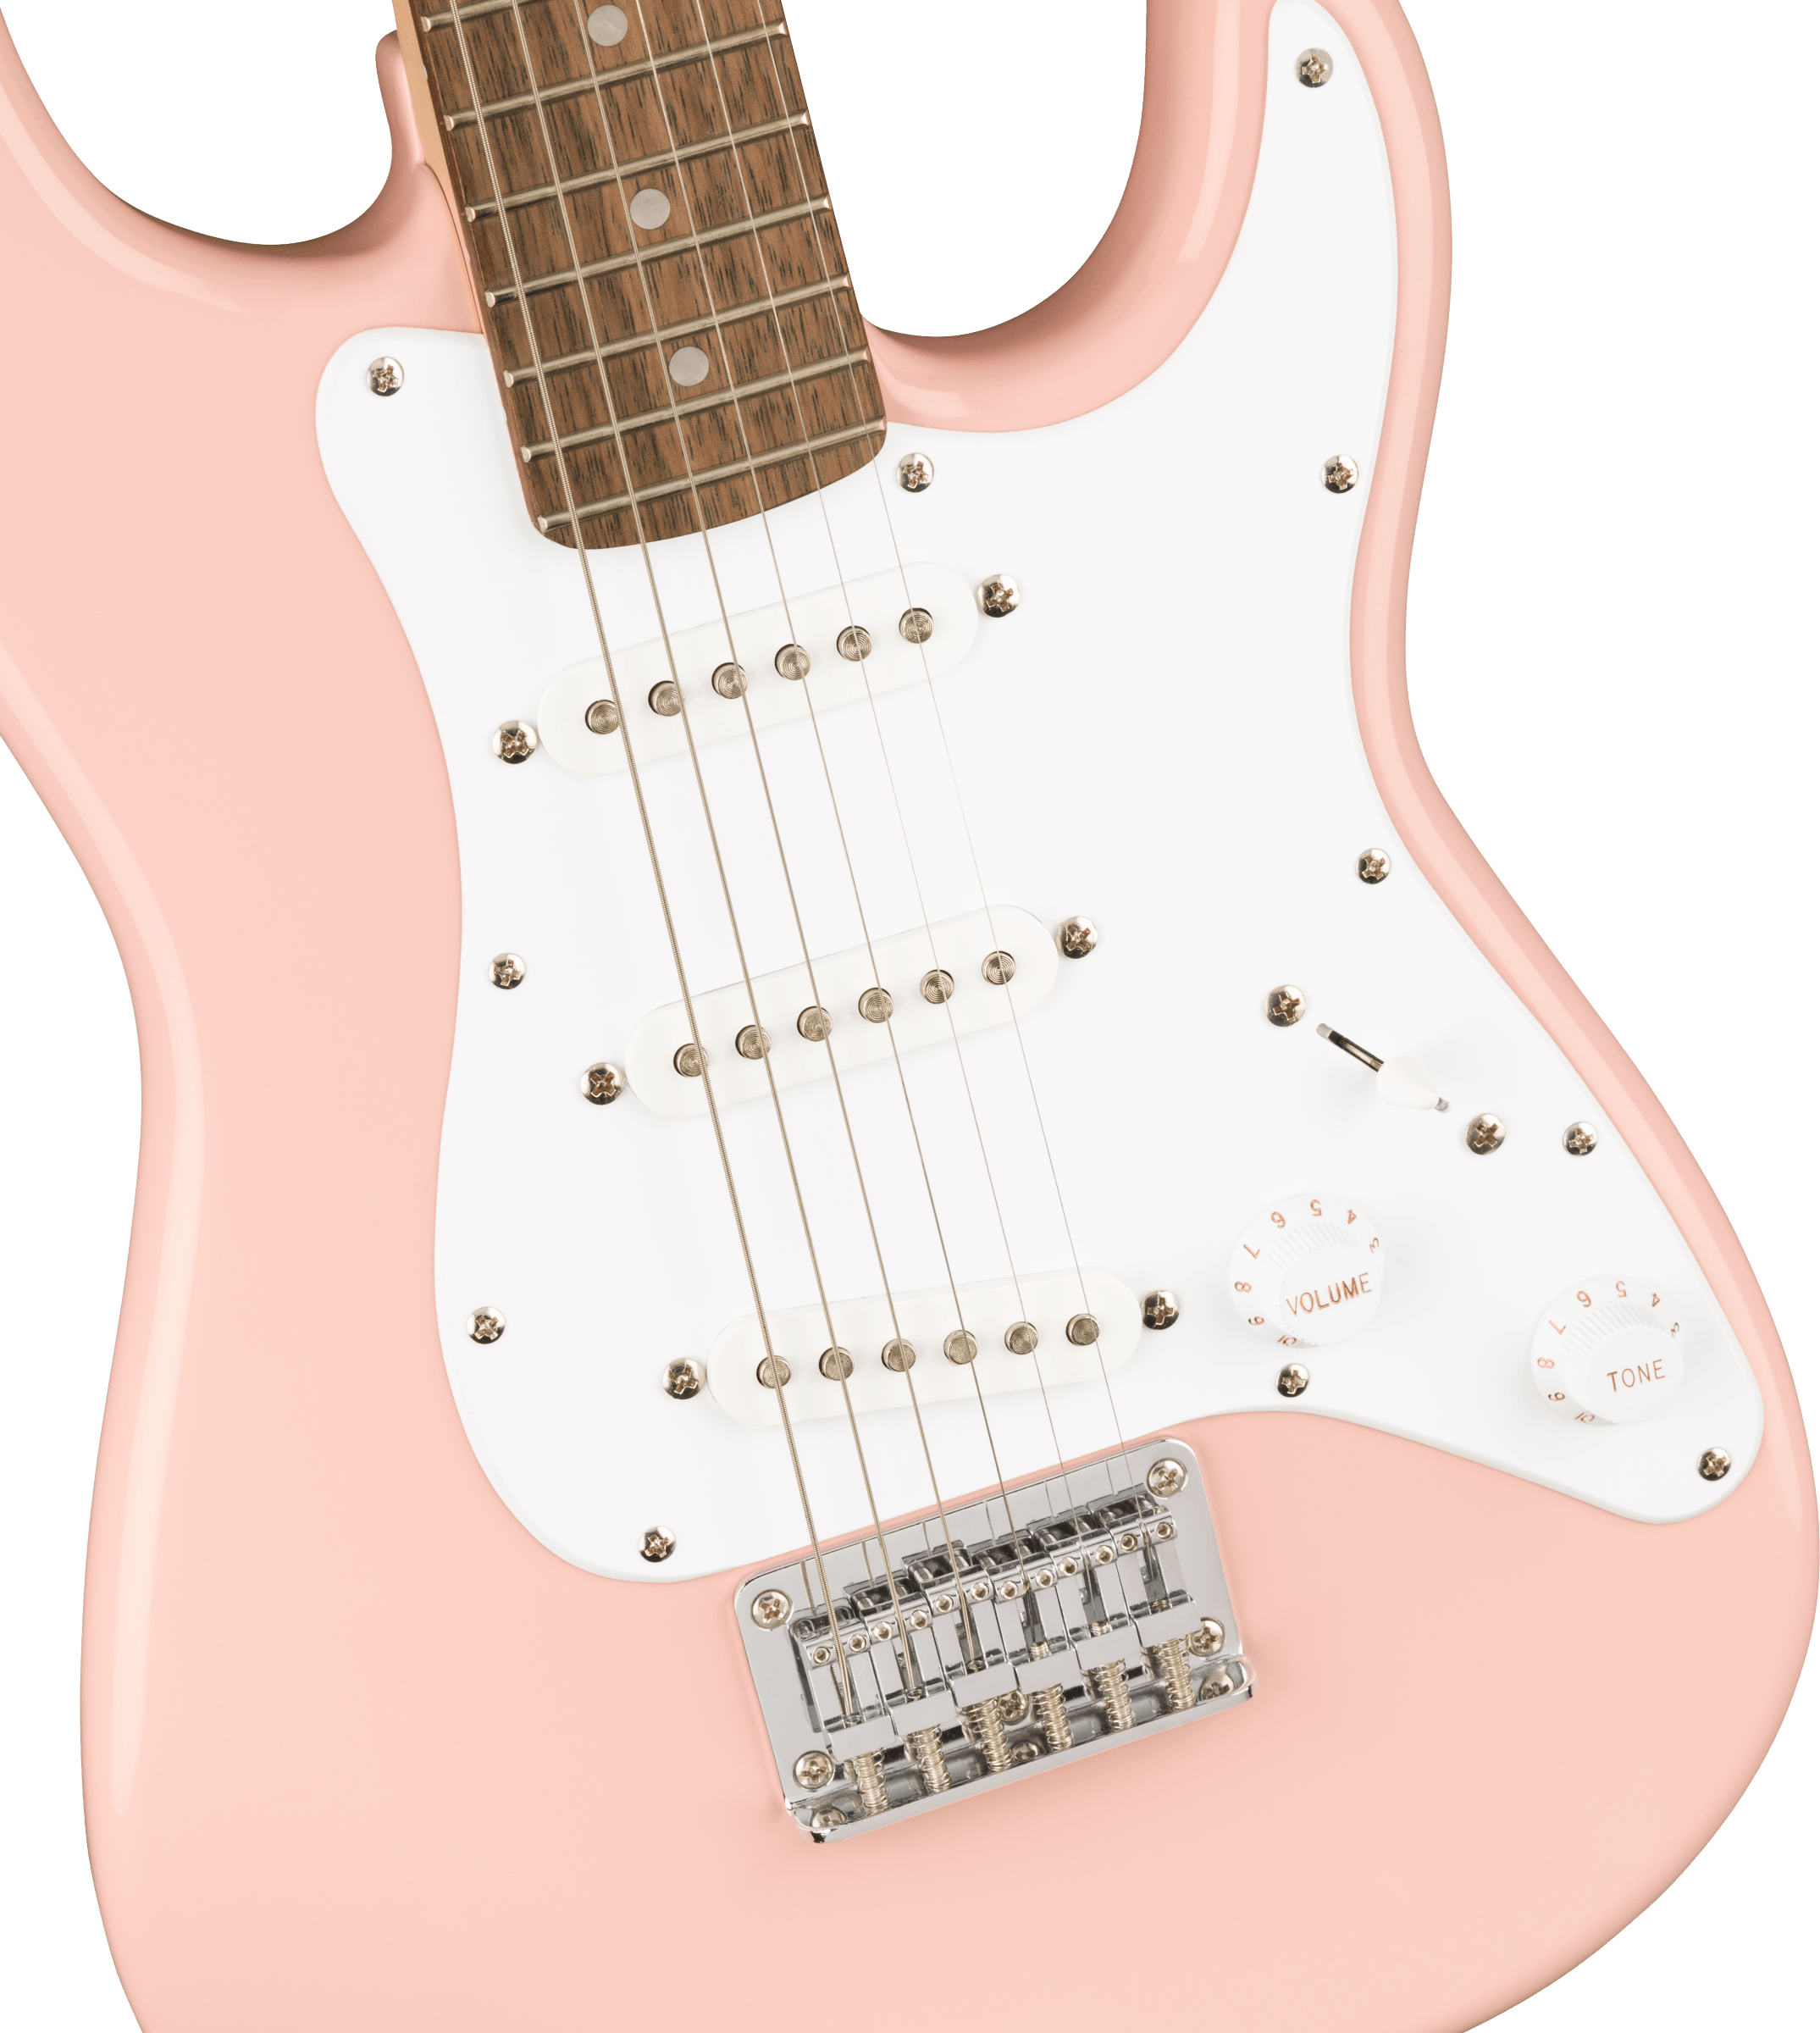 Squier Squier Mini Strat V2 Ht Sss Lau - Shell Pink - Electric guitar for kids - Variation 2